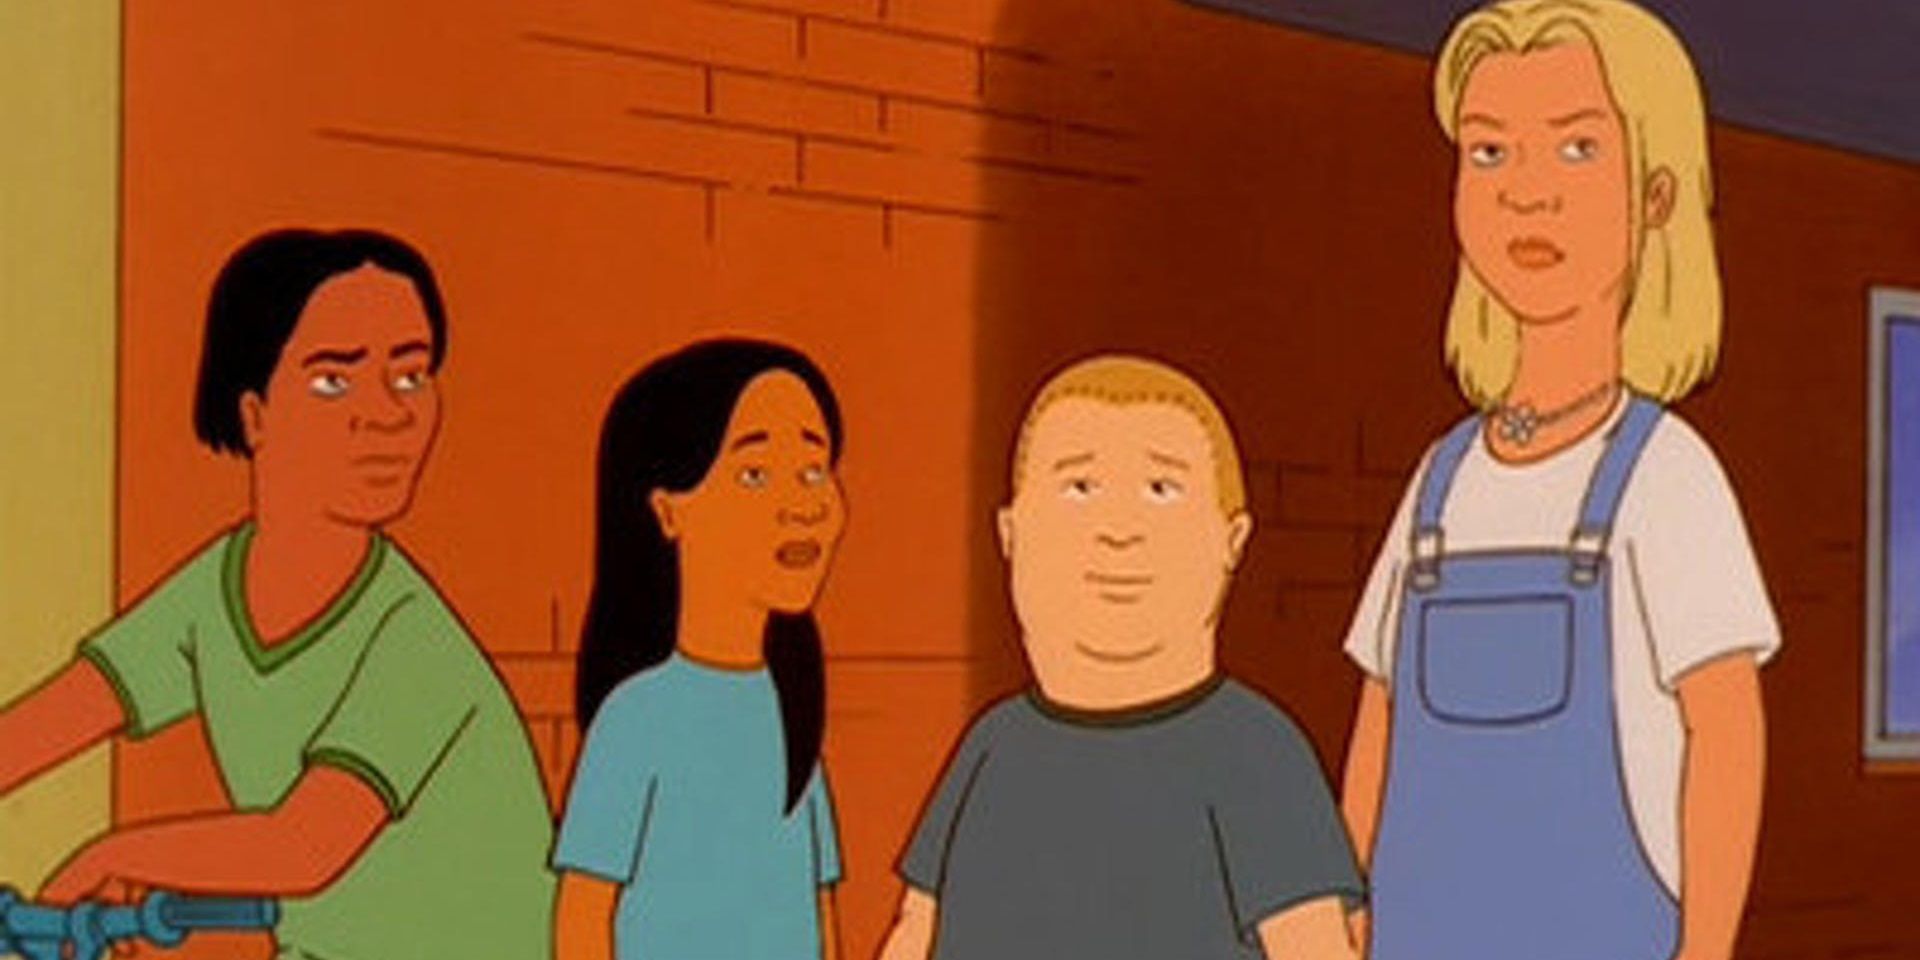 Bobby hangs out with an older girl in King of the Hill